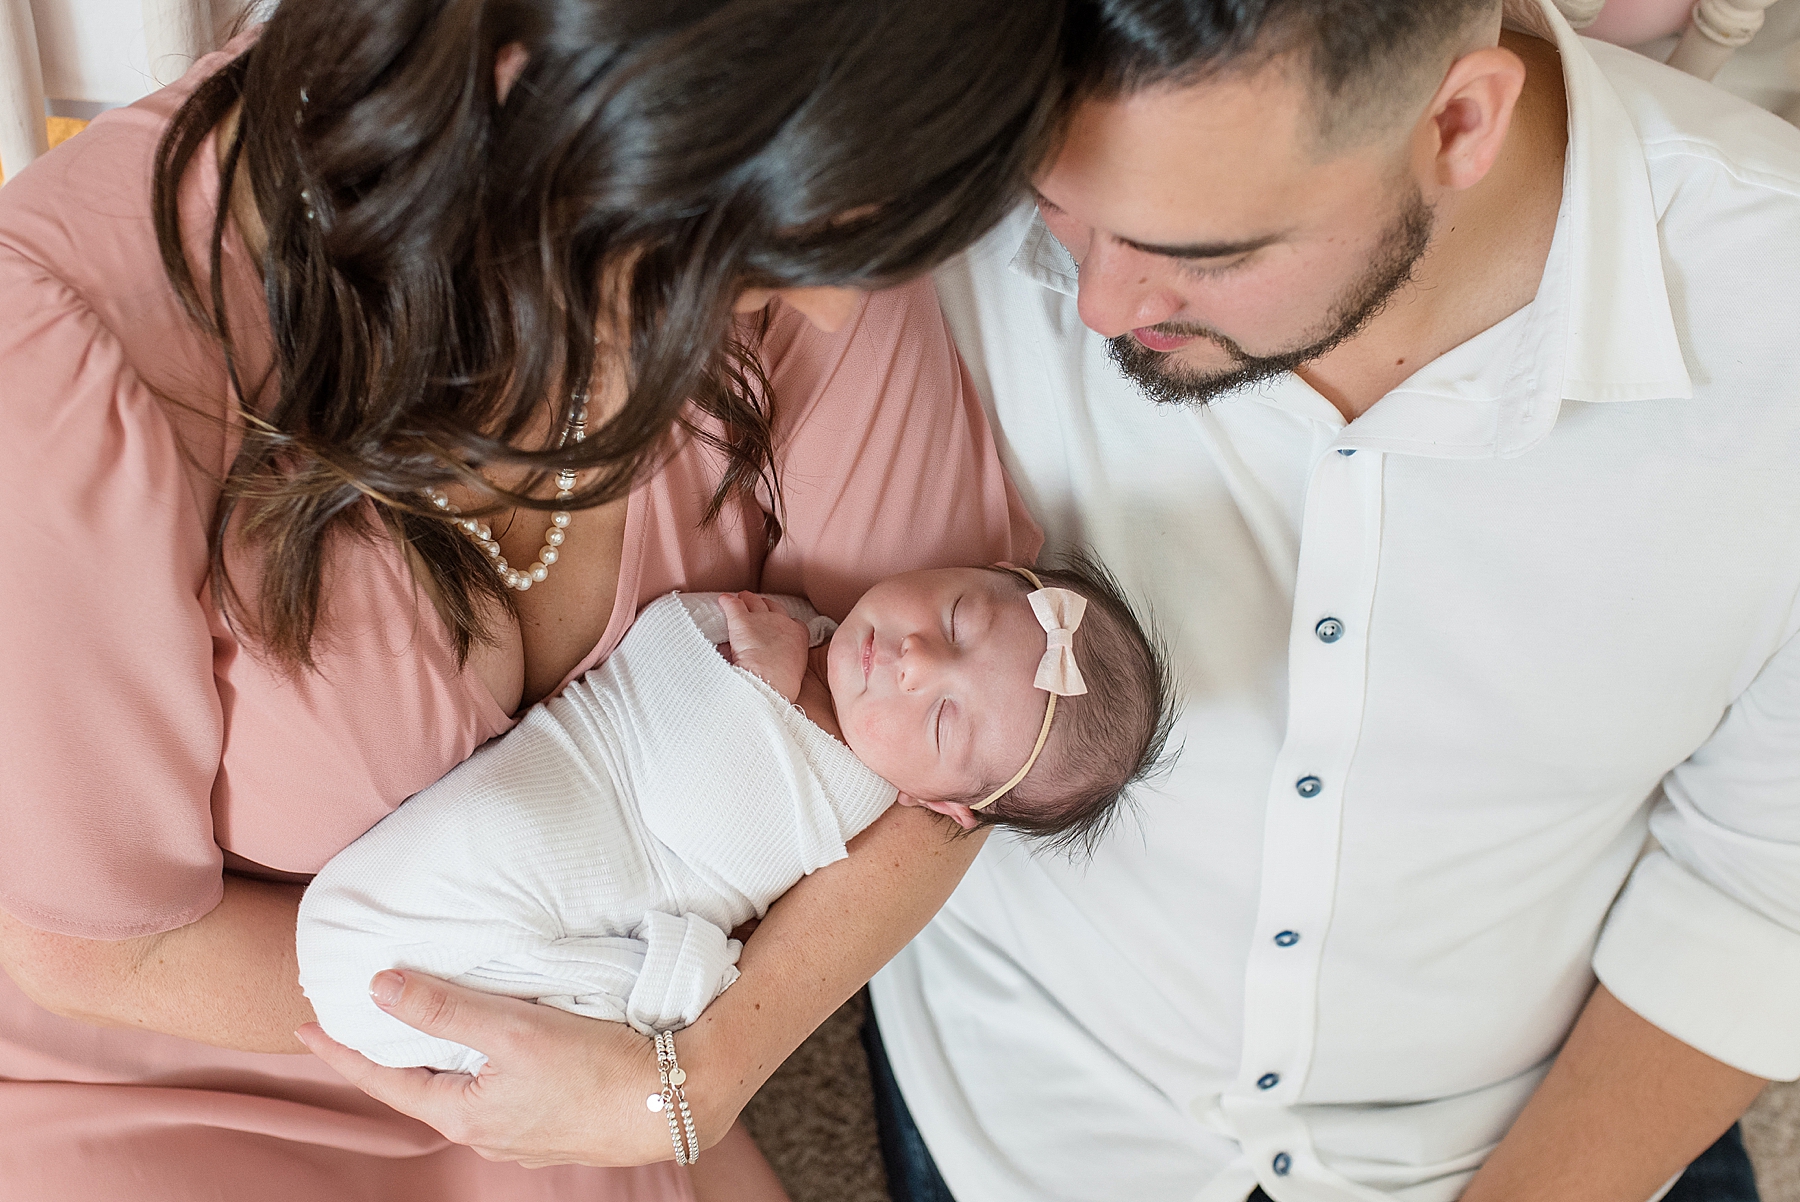 Mom in pink dressing holding newborn in white swaddle with dad arm around shoulder | Lindsey Dutton Photography | Dallas Area Family Photographer | newborn session, newborn posing ideas, newborn photos, girl nursery inspiration | via lindseyduttonphotography.com